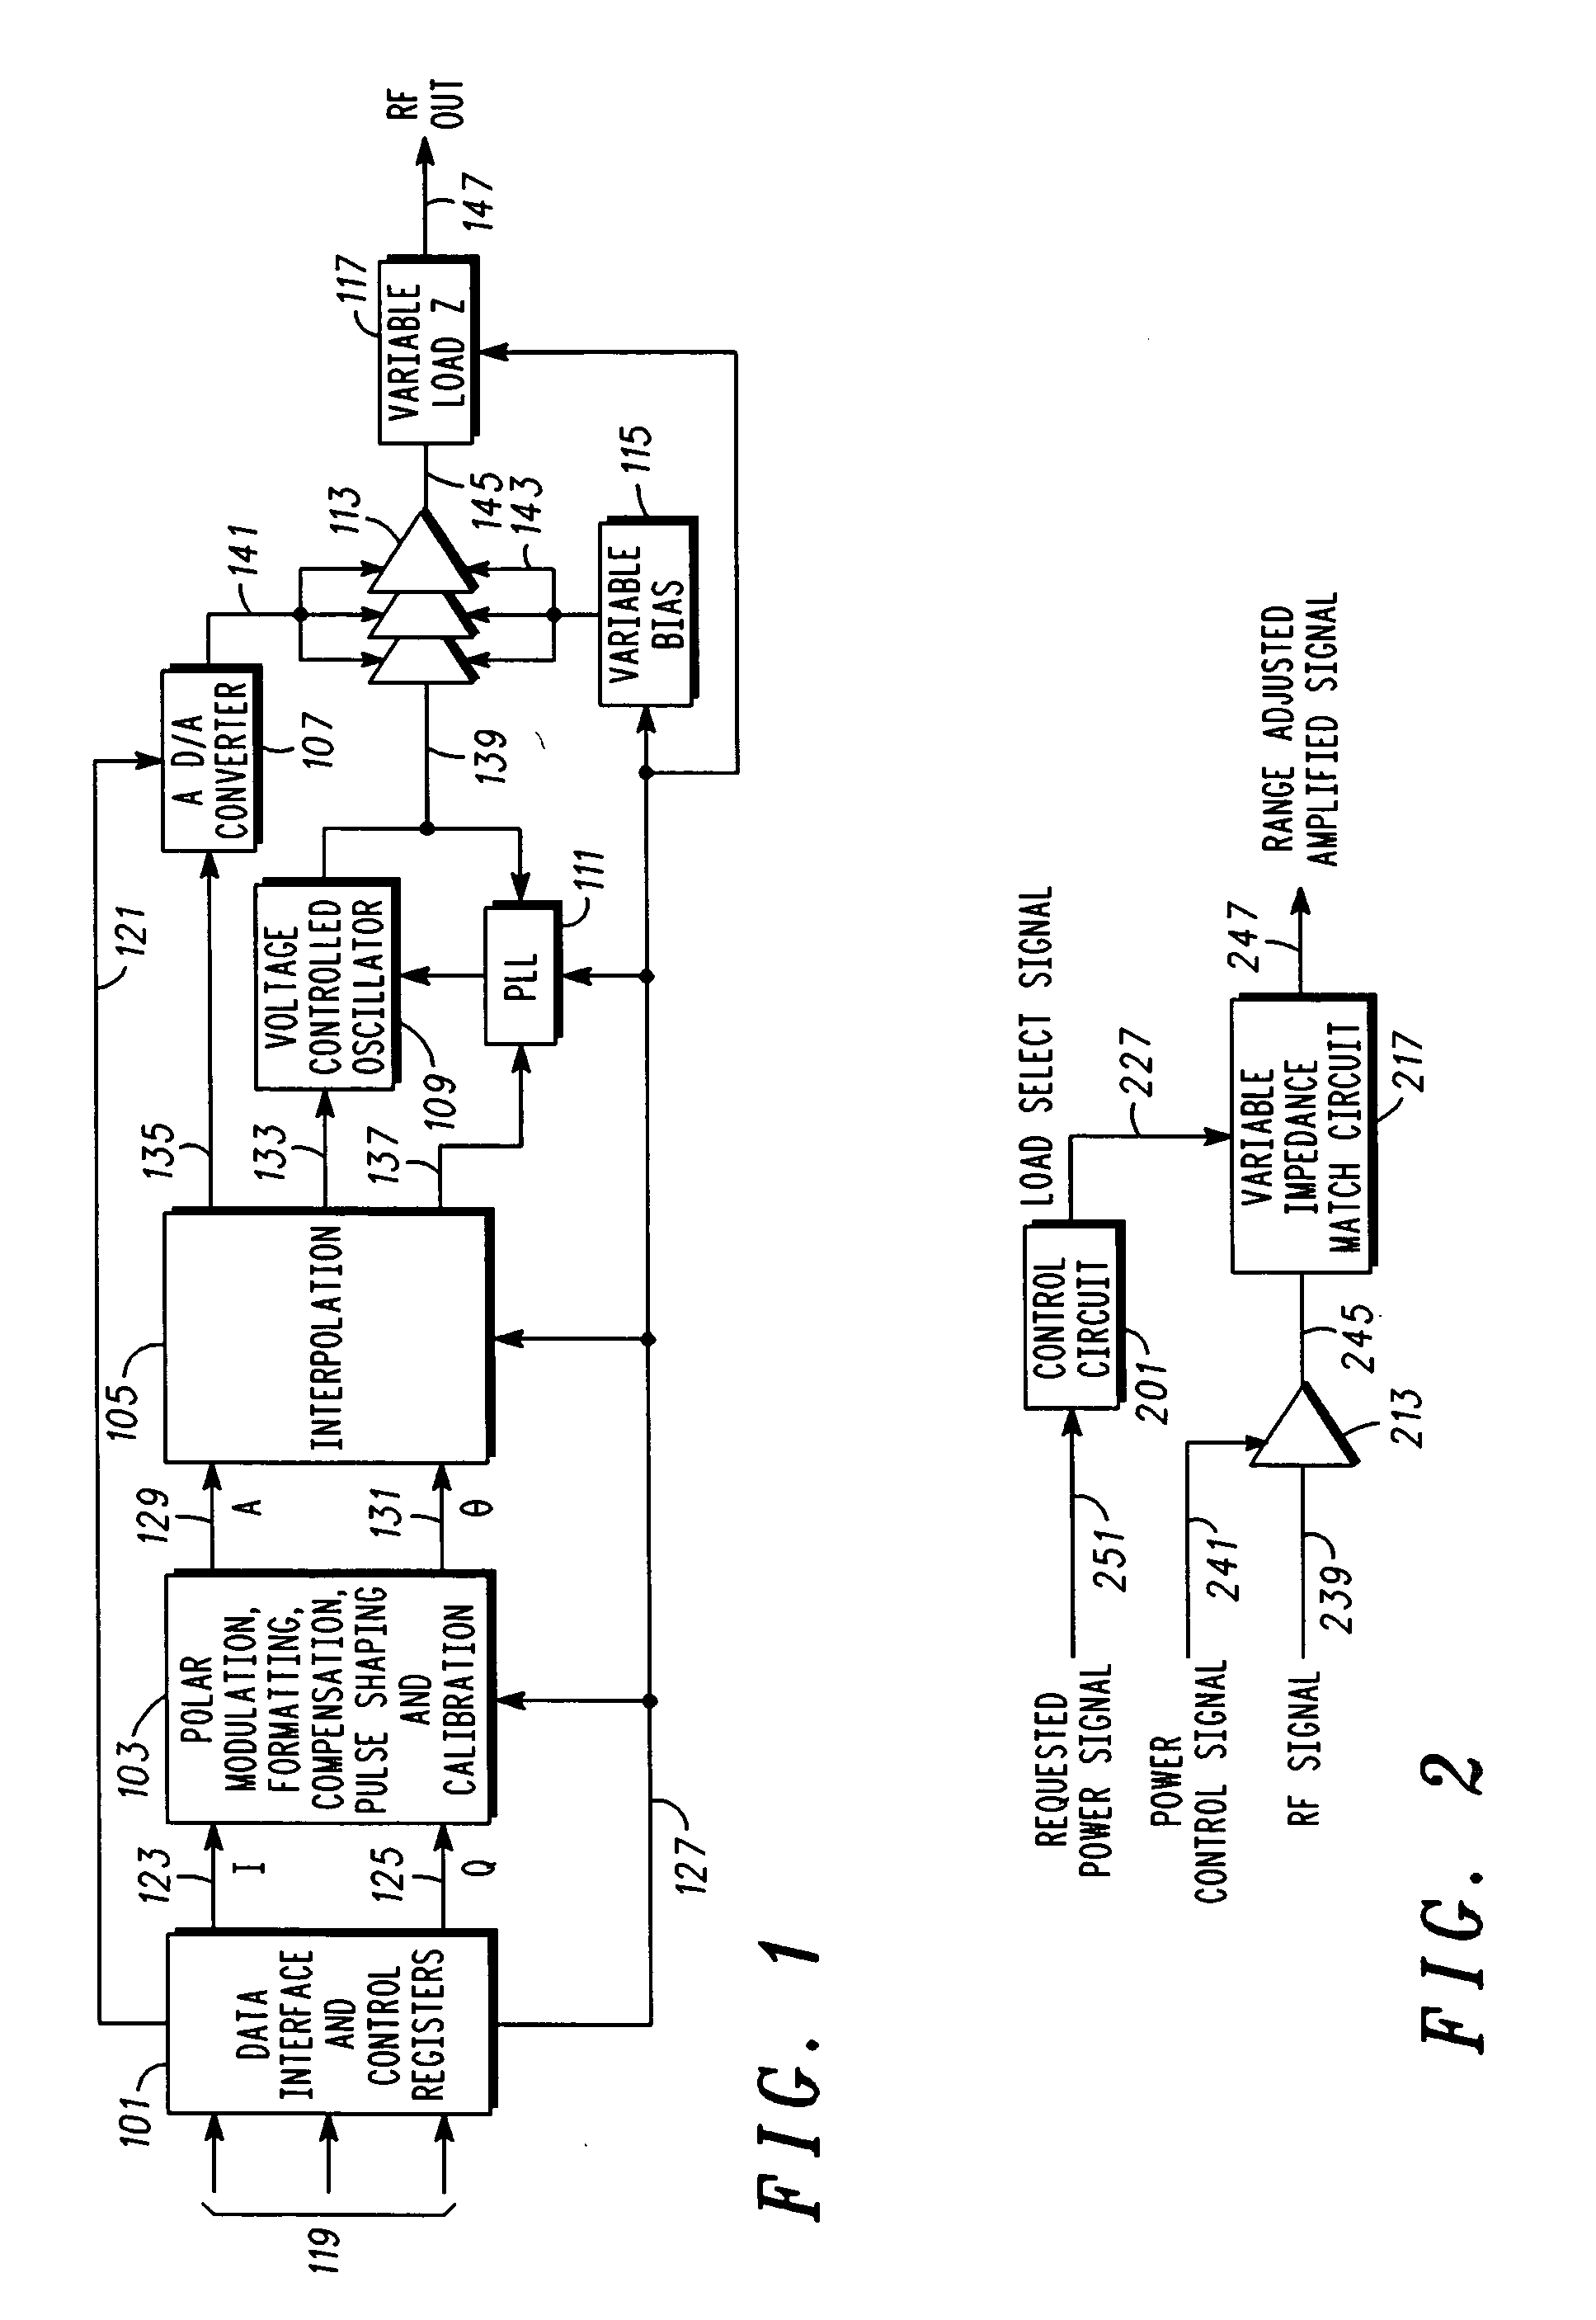 Multi-state load switched power amplifier for polar modulation transmitter